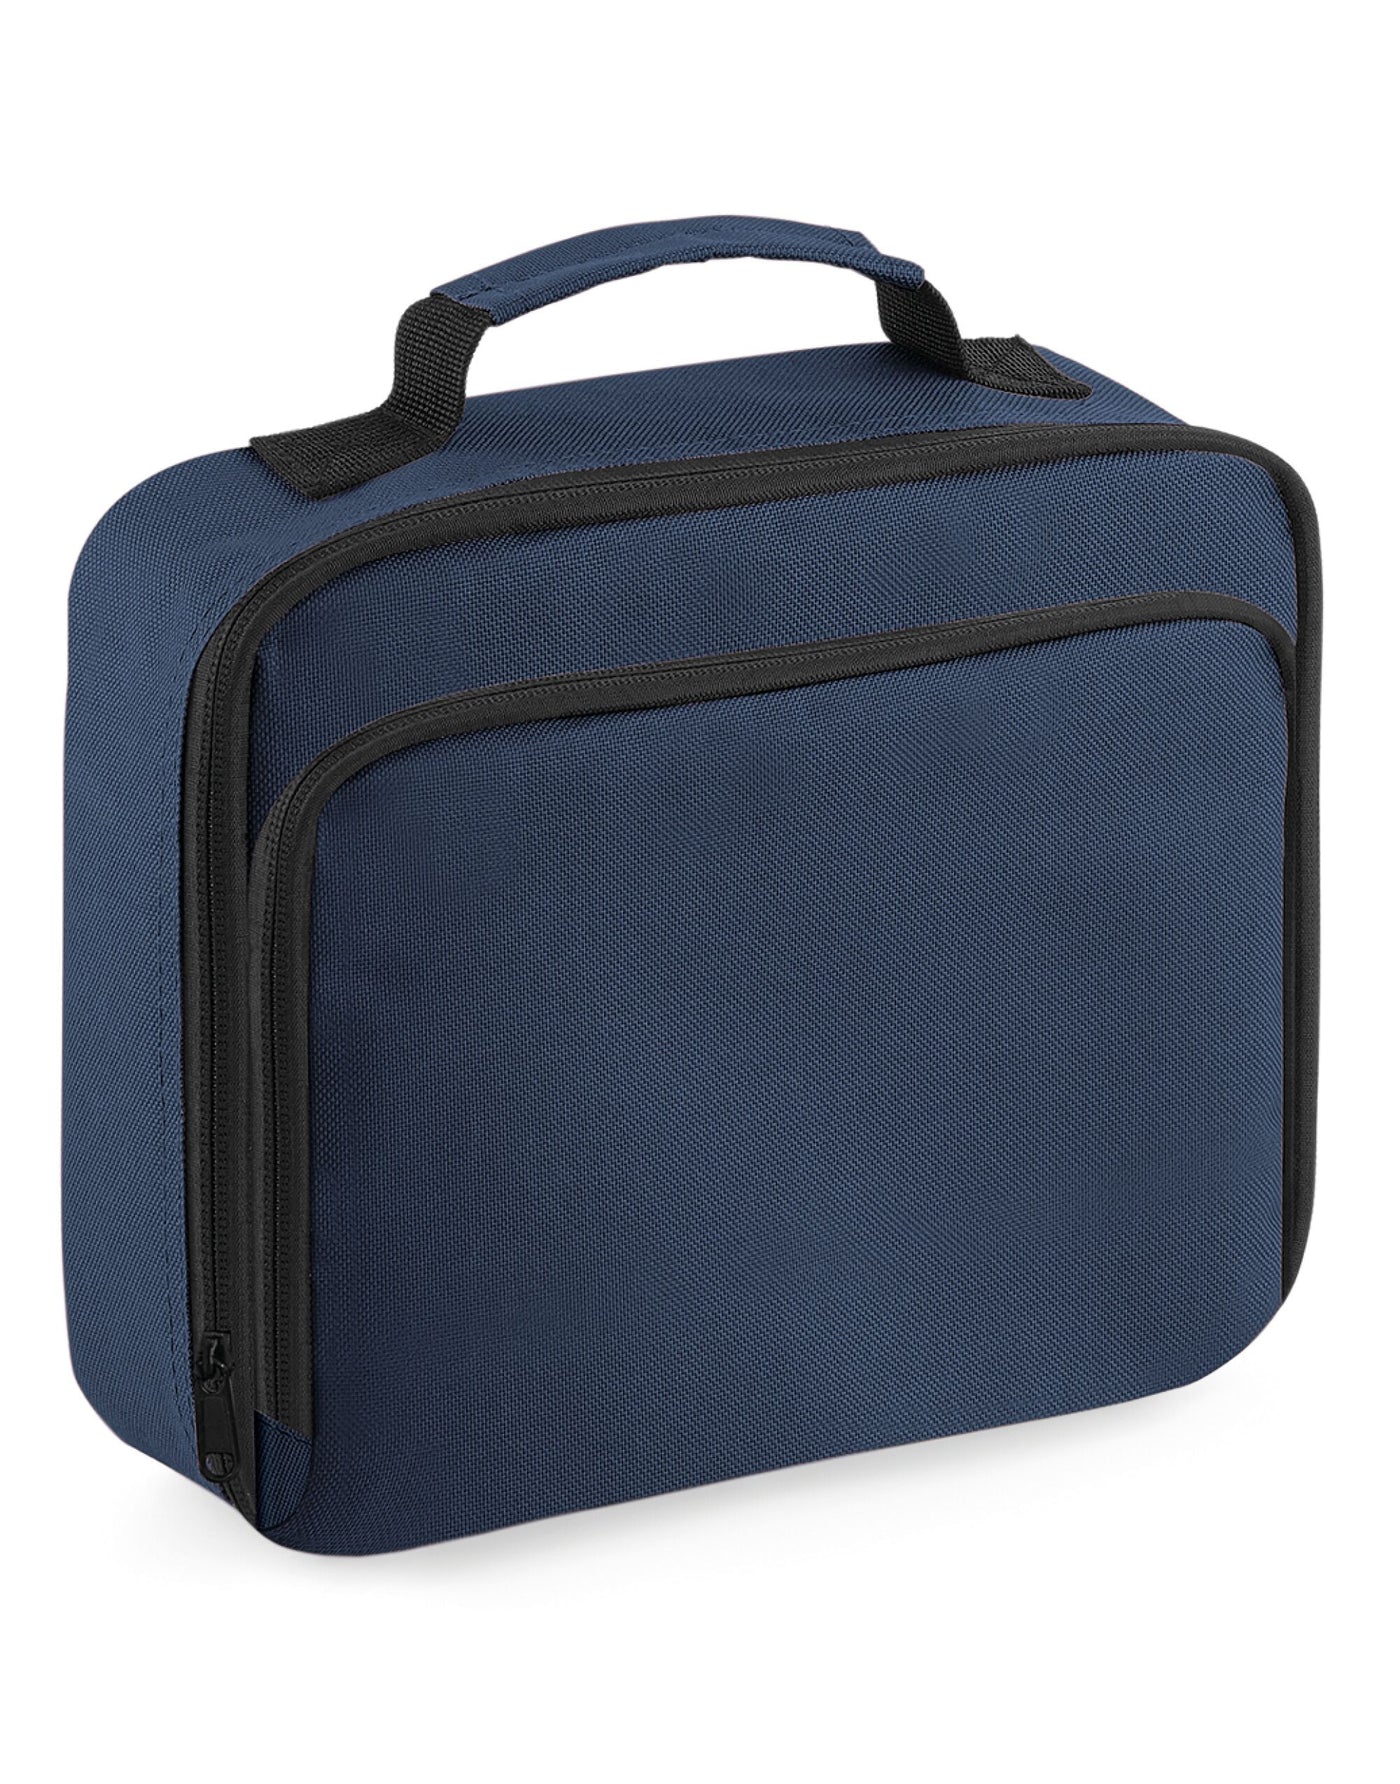 French Navy Lunch Cooler Bag